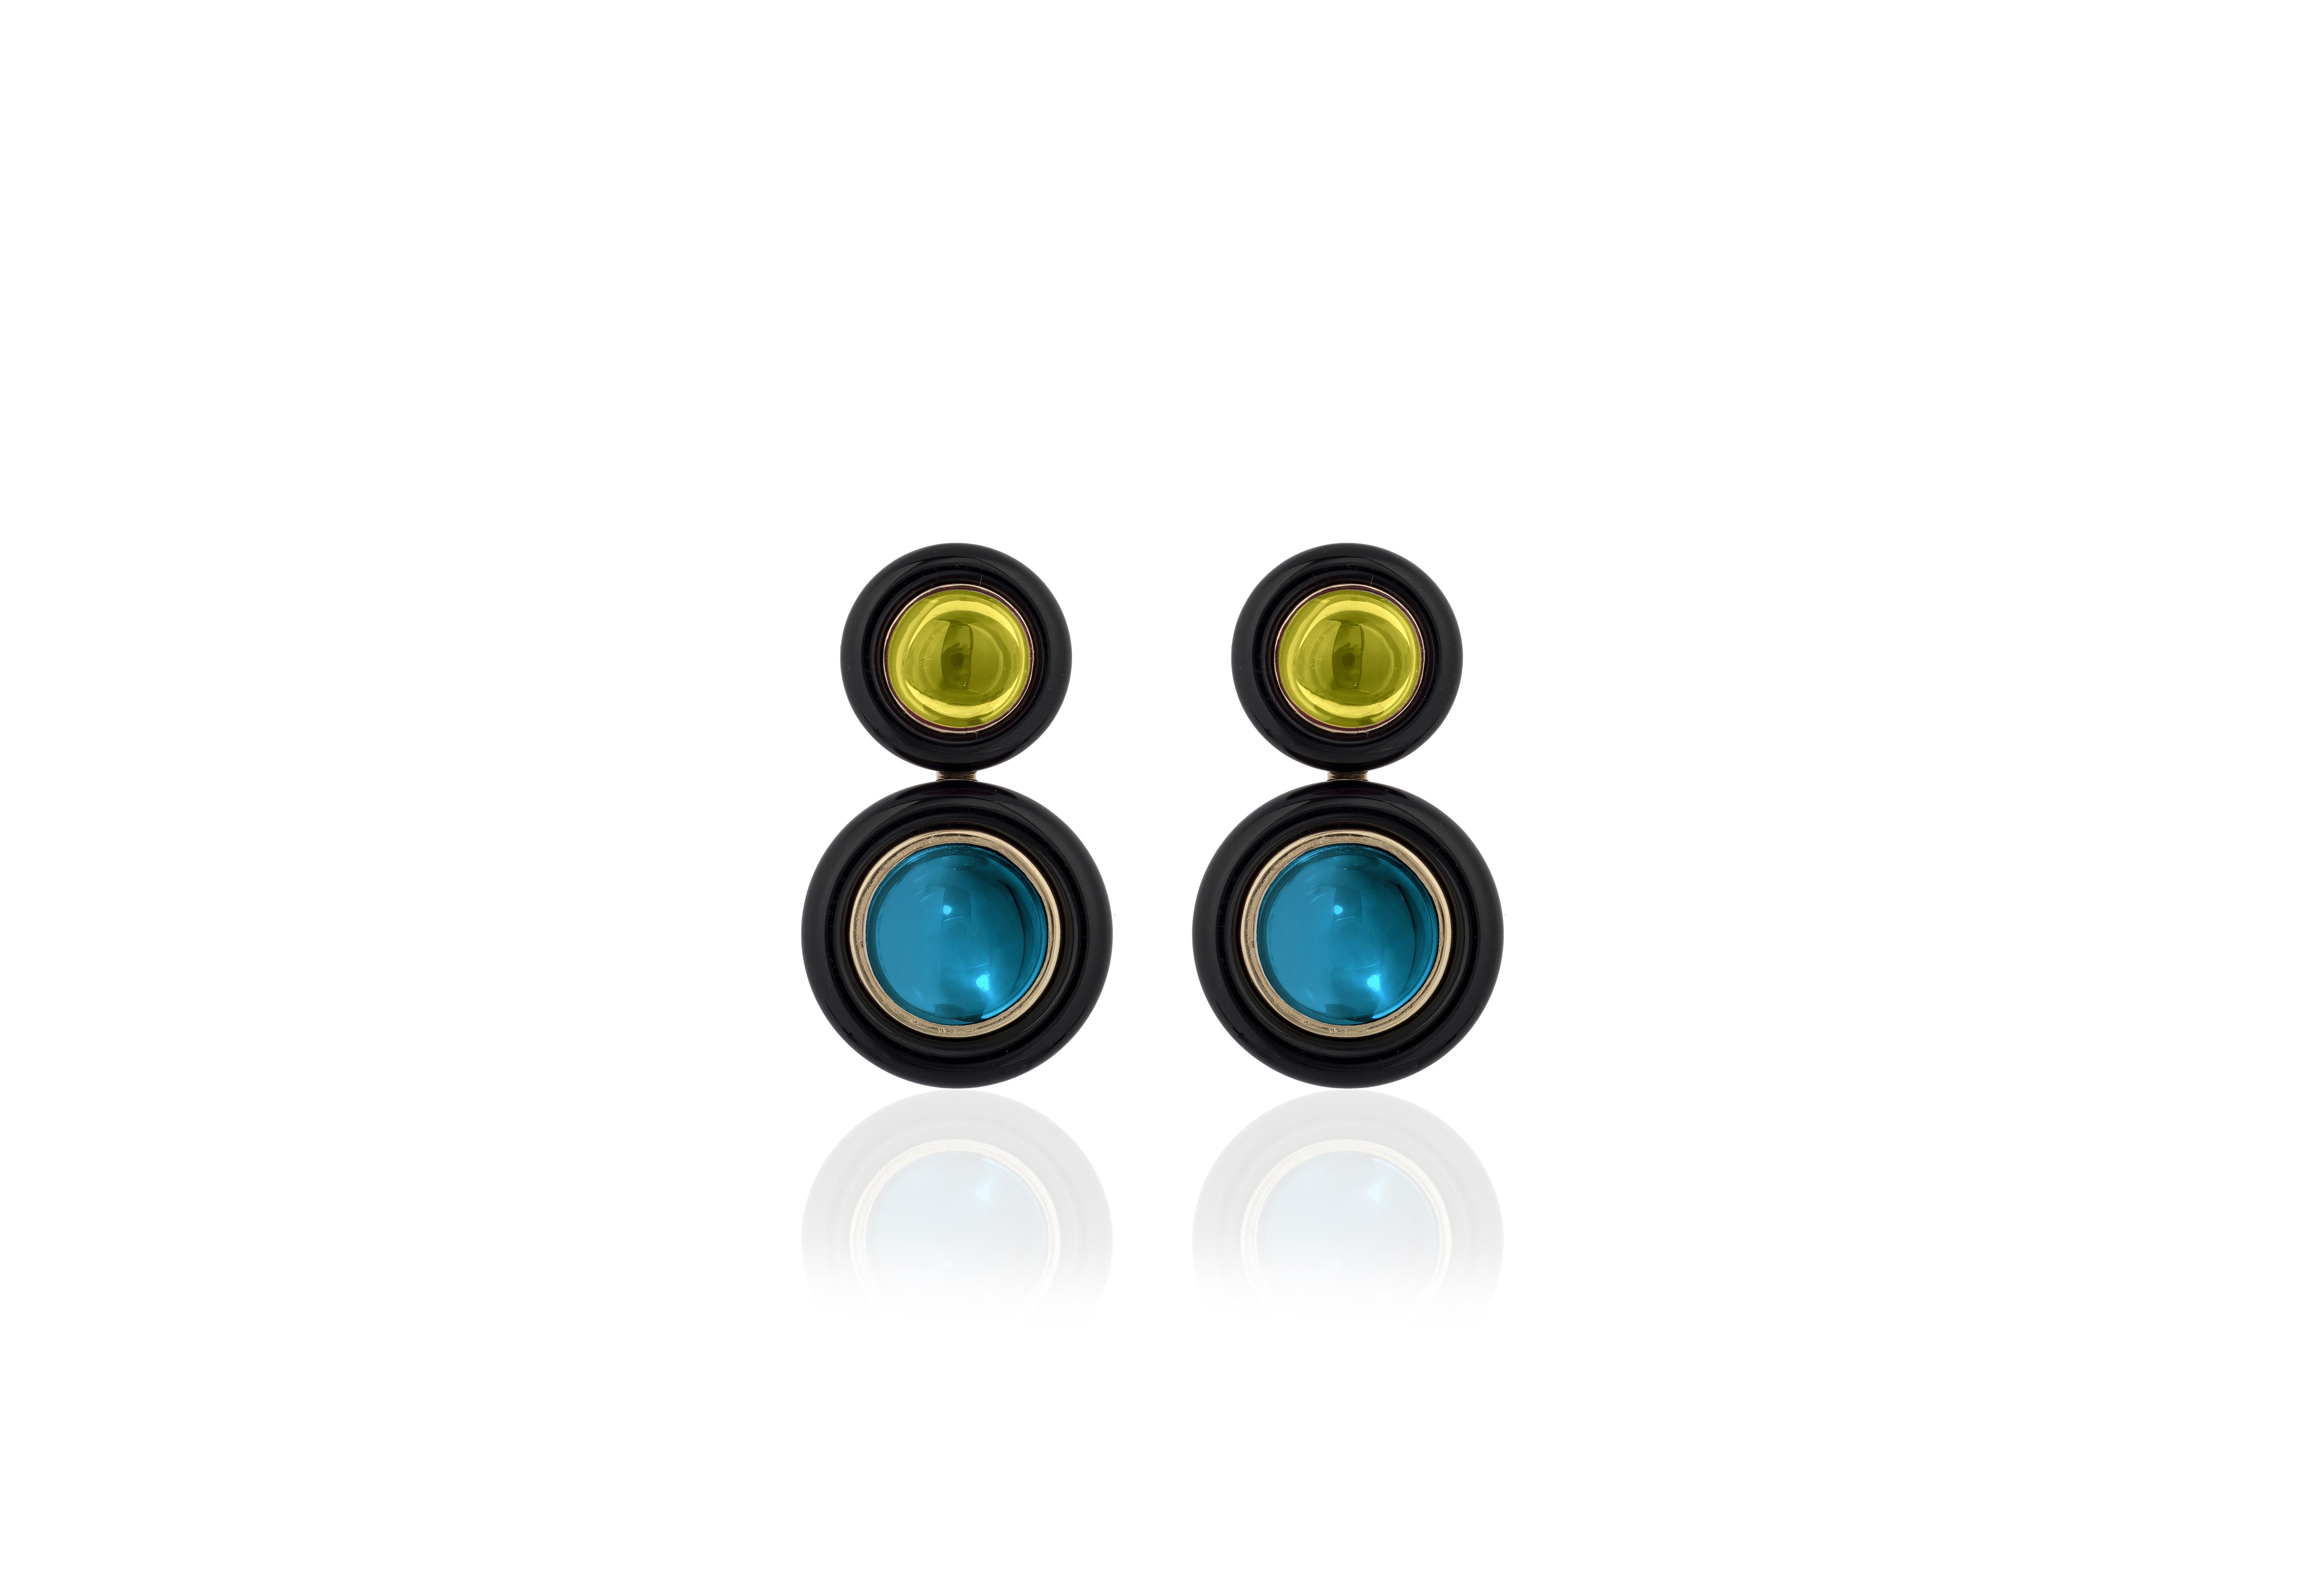 Peridot and London Blue Topaz Earrings with Onyx Ring Surround in 18K Yellow Gold, from 'Limited Edition’.
These limited edition items are just that! Limited! 
Feel the exclusiveness in every piece from this collection and Feel the love in these